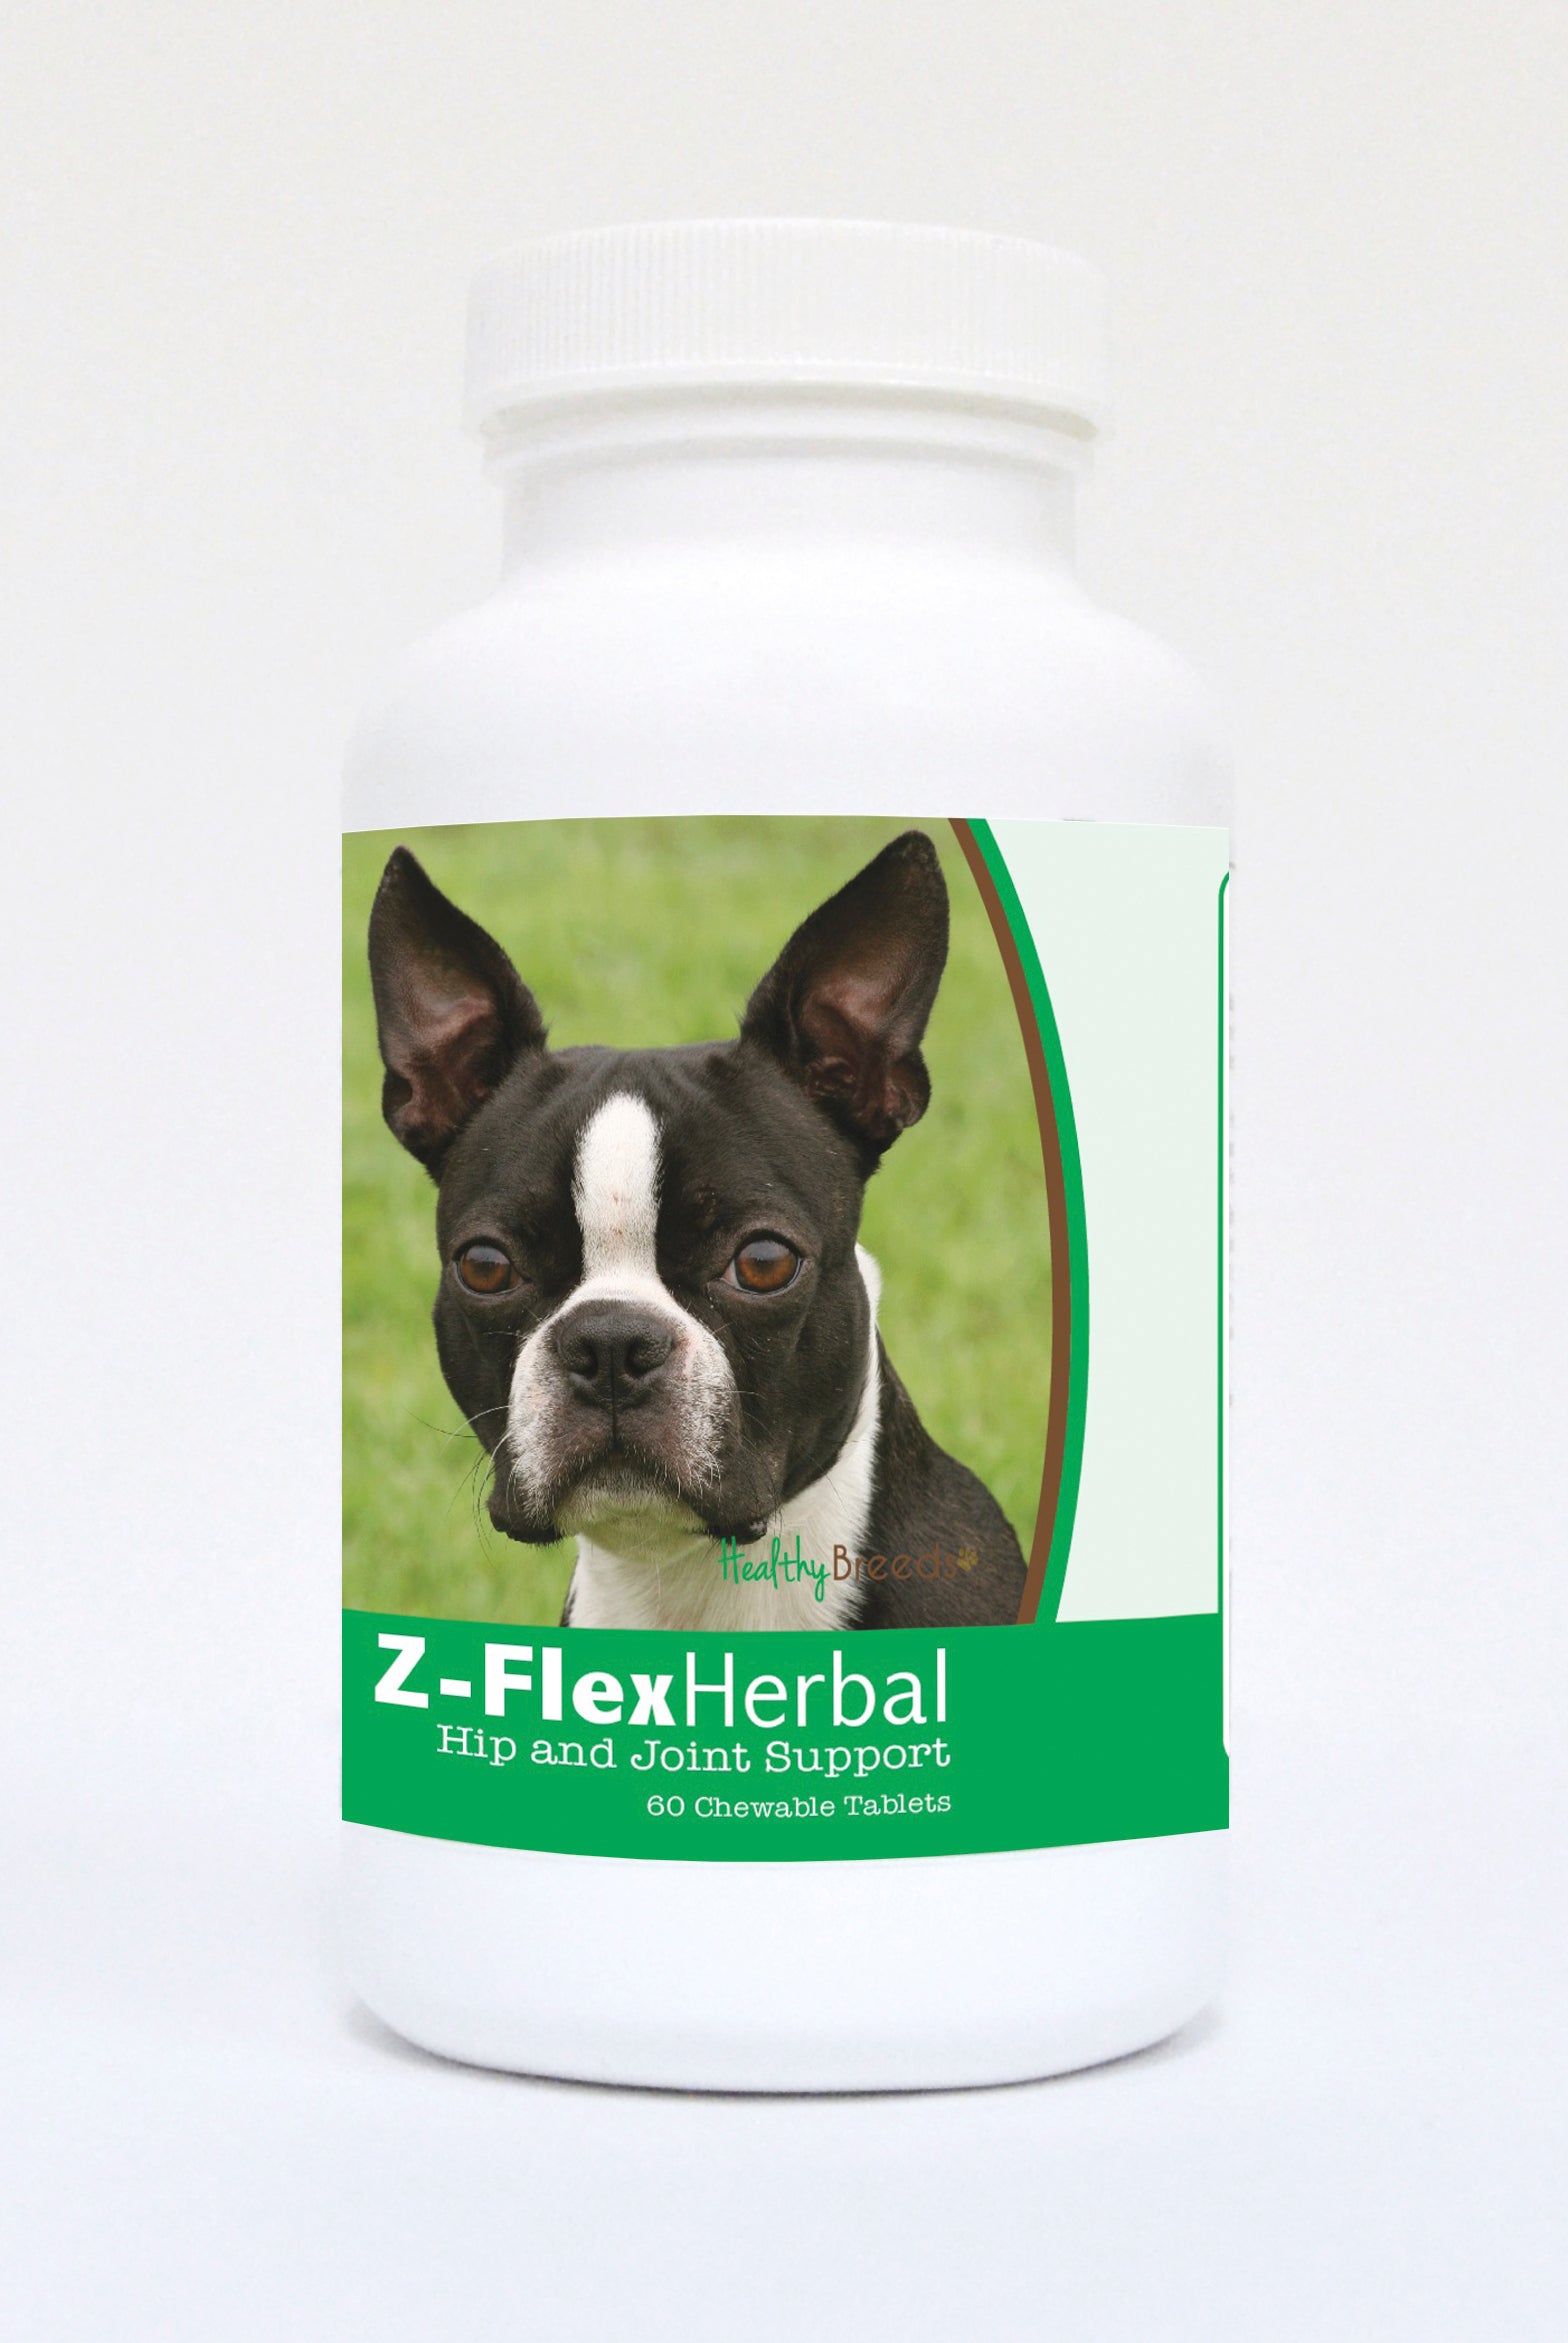 Boston Terrier Natural Joint Support Chewable Tablets 60 Count